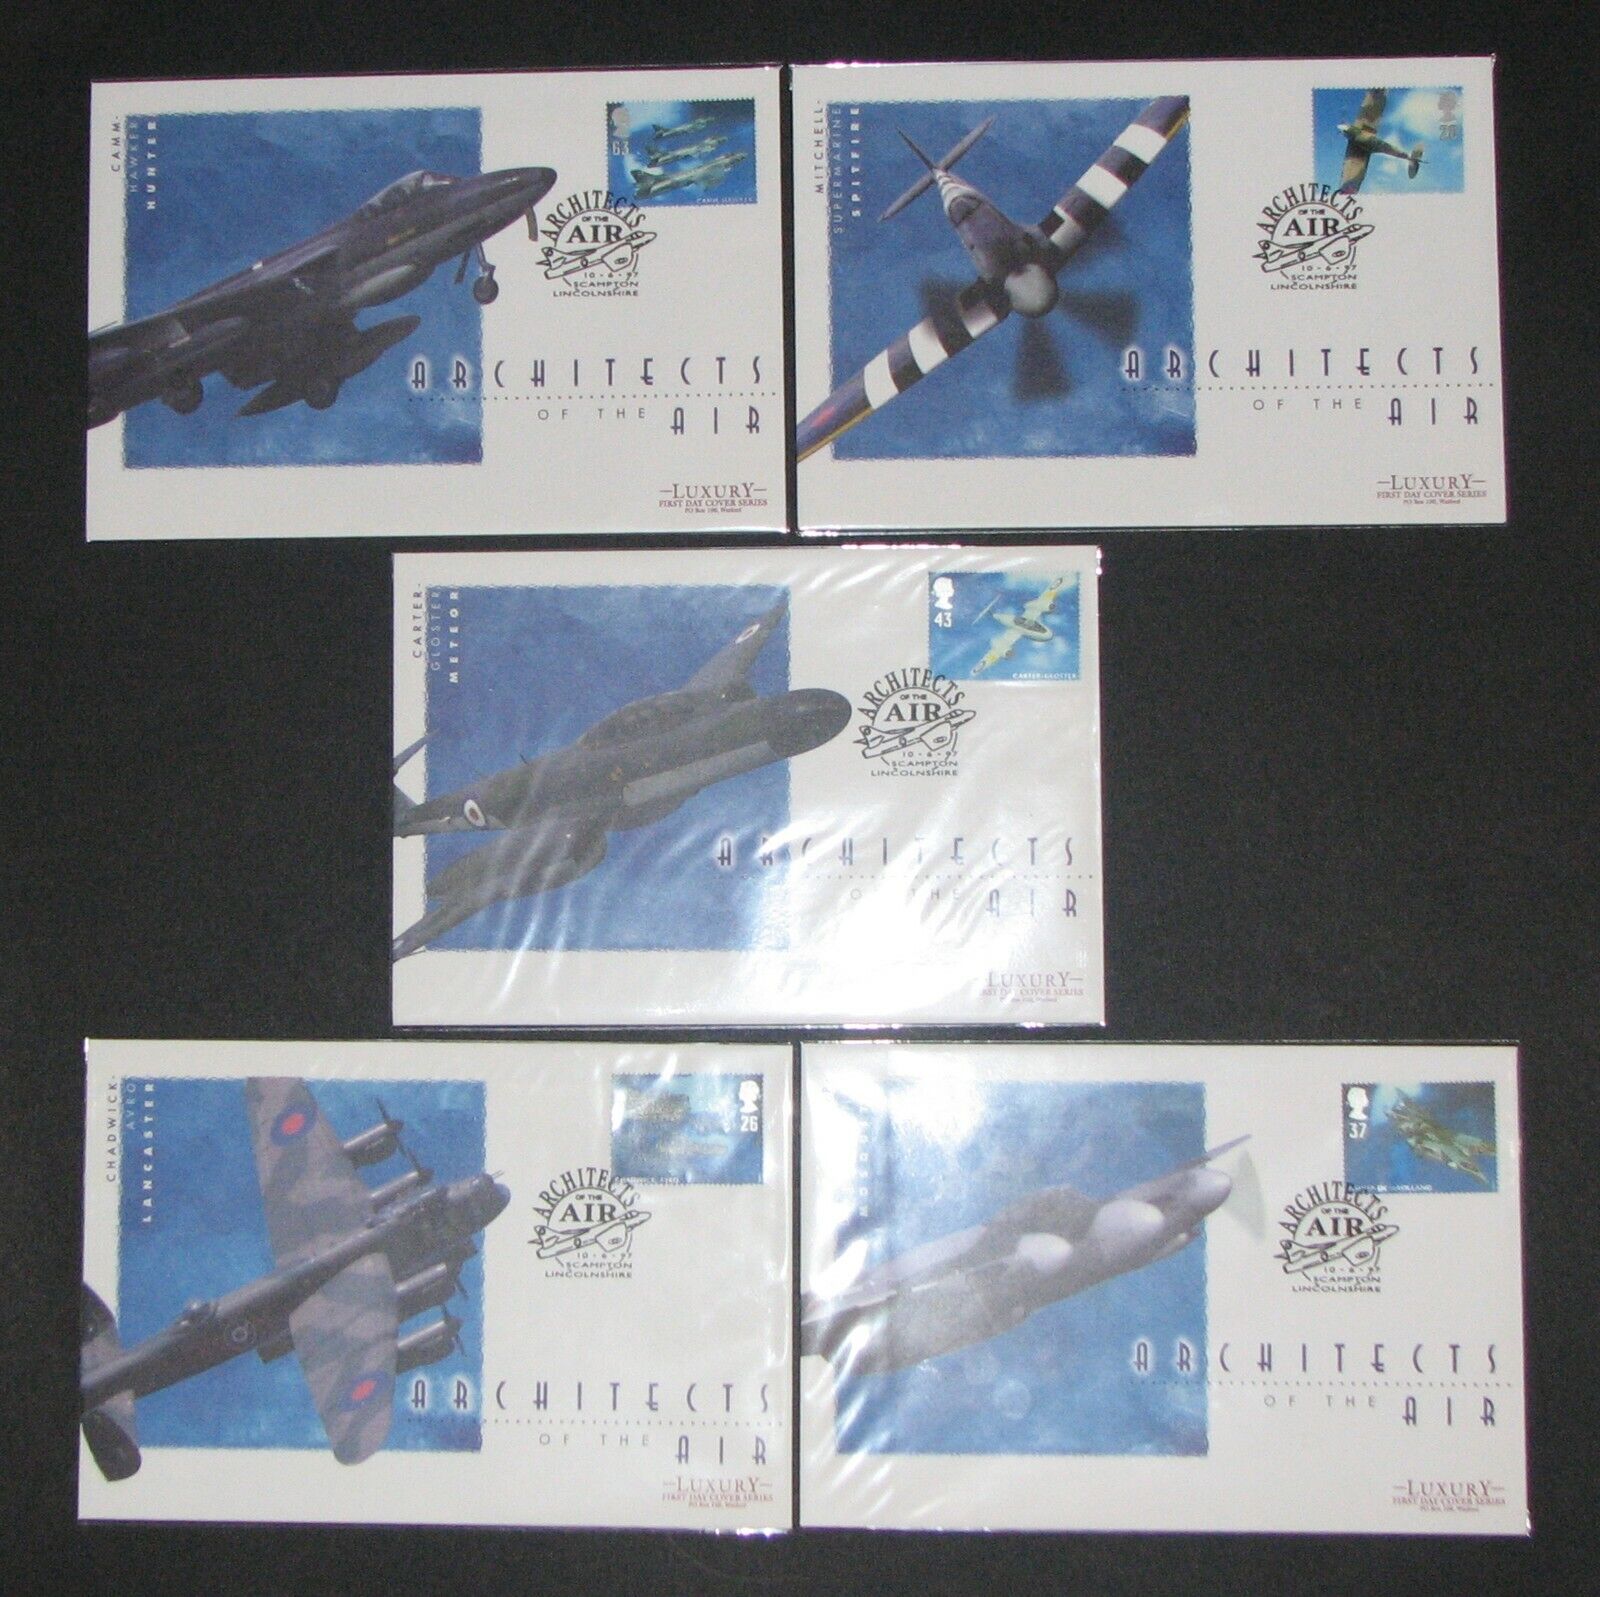 GB 1997 LUXURY WESTMINSTER FDCs X 5 10th June  Air Architects Sc